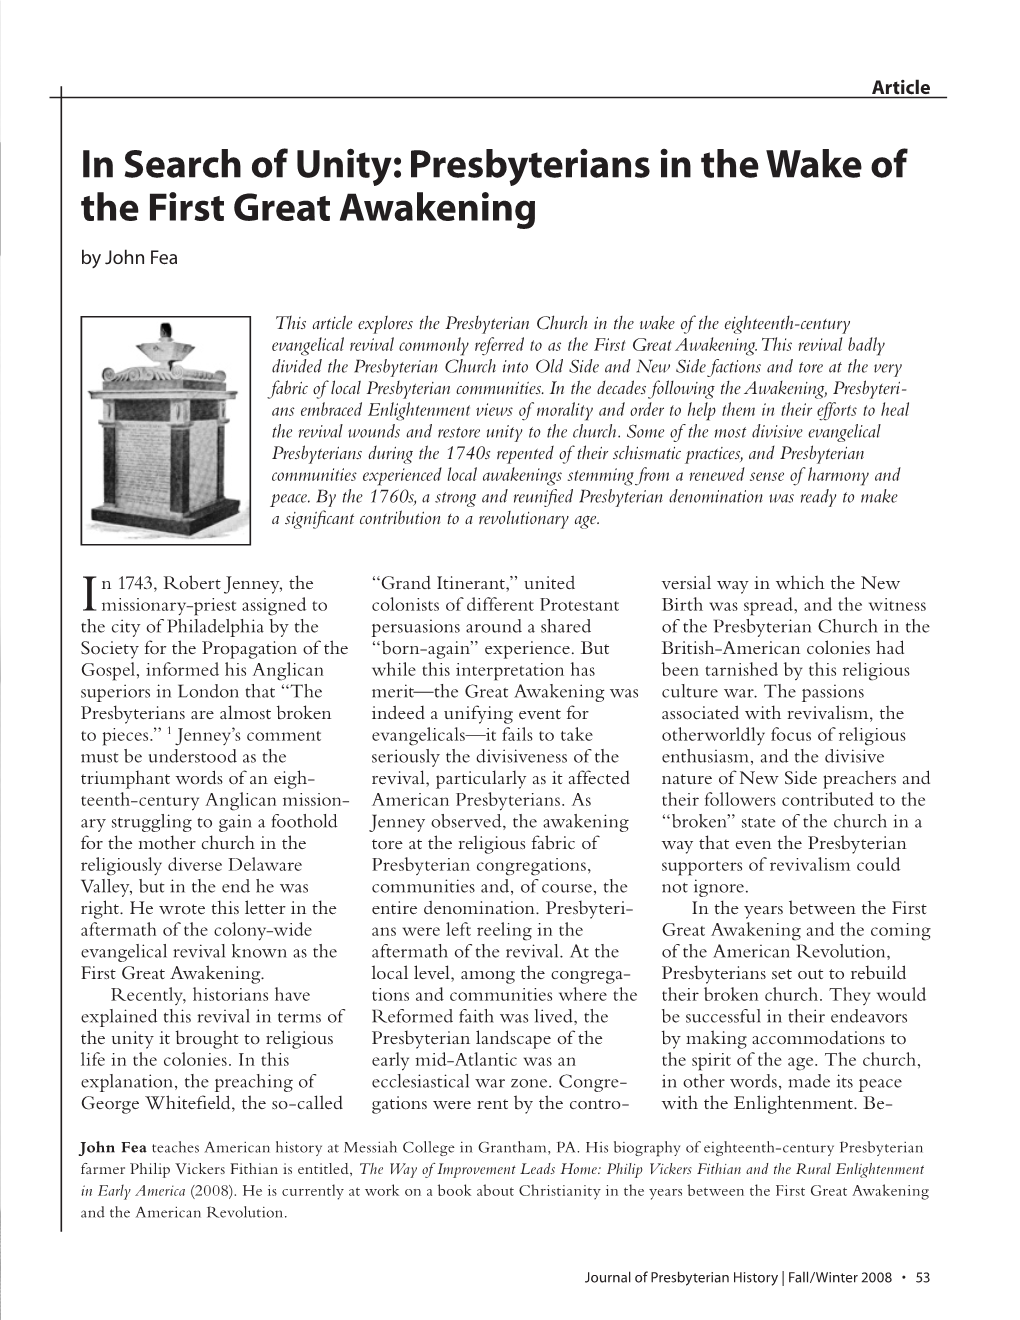 Presbyterians in the Wake of the First Great Awakening by John Fea